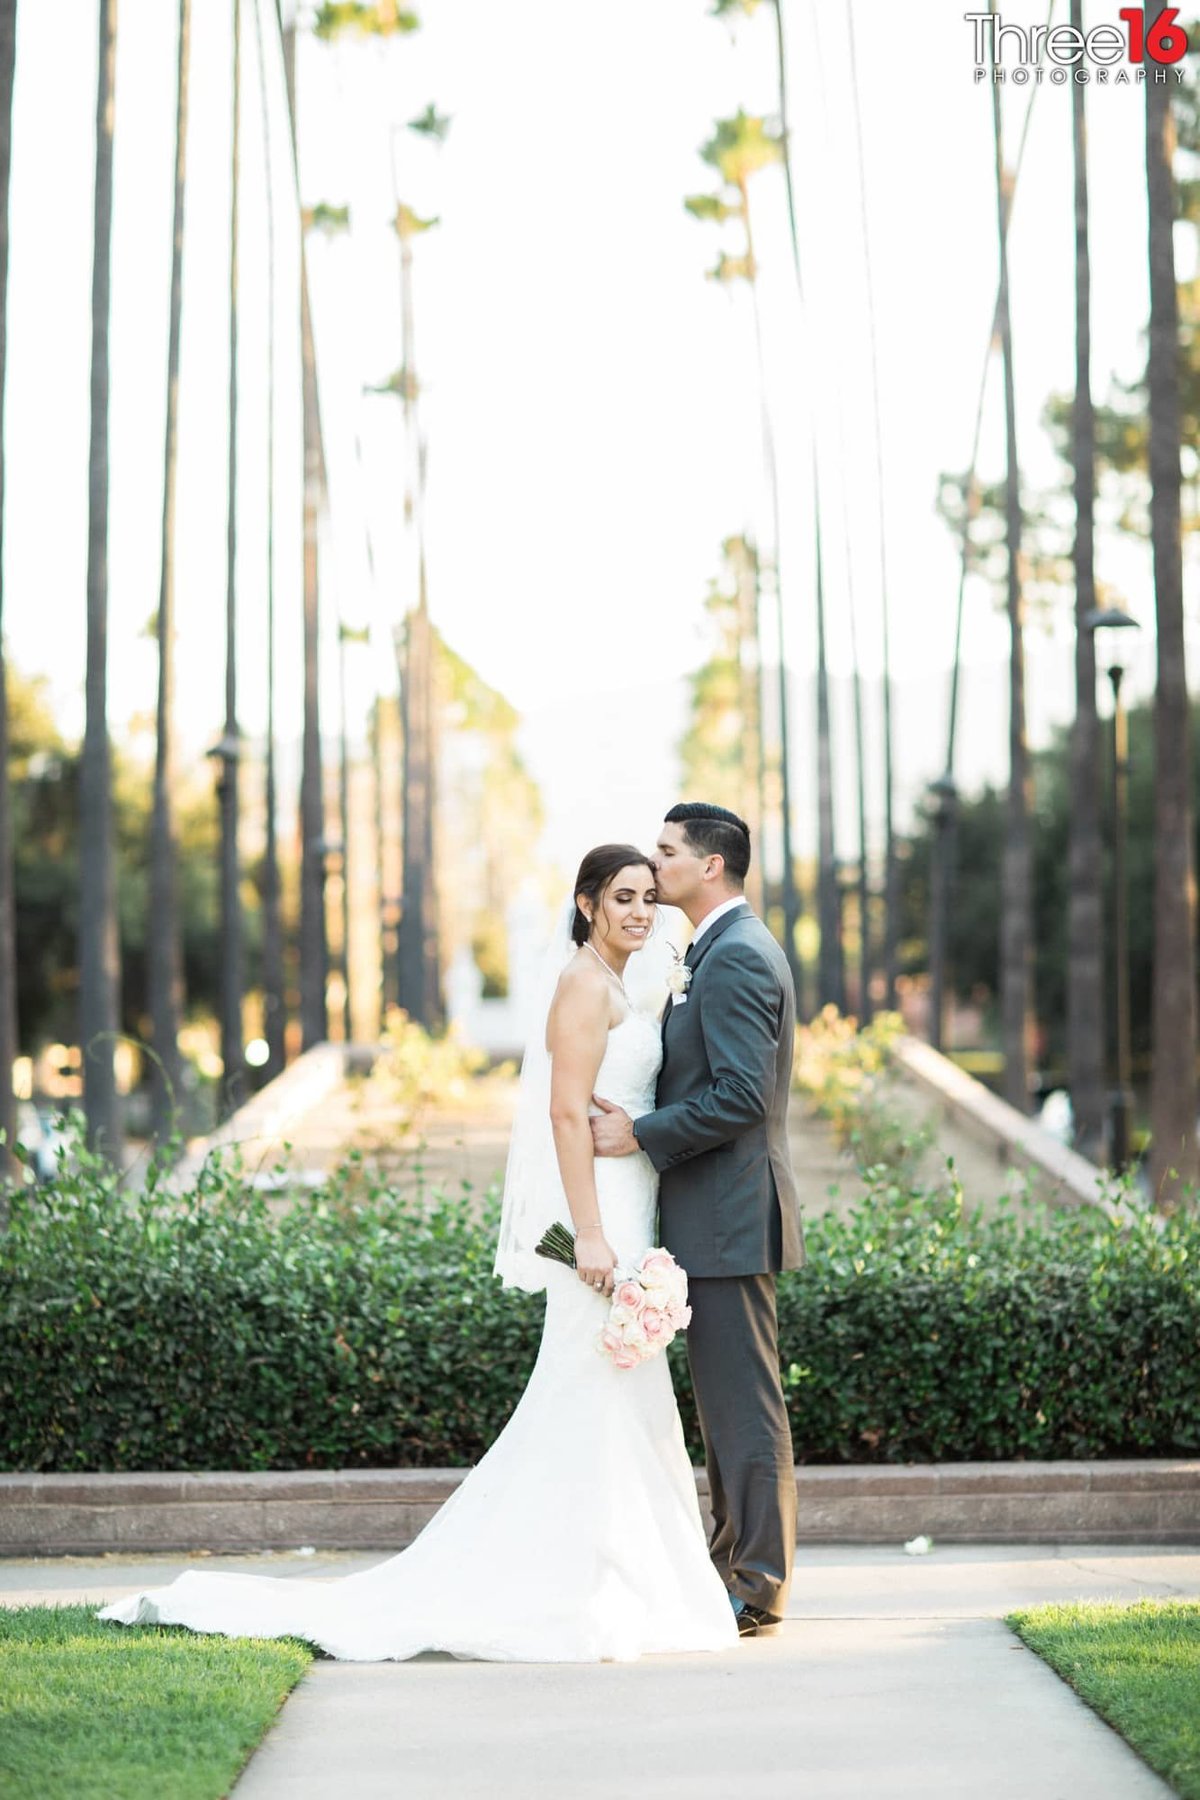 Bride an d Groom share an intimate moment after a Brand Library Park wedding ceremony